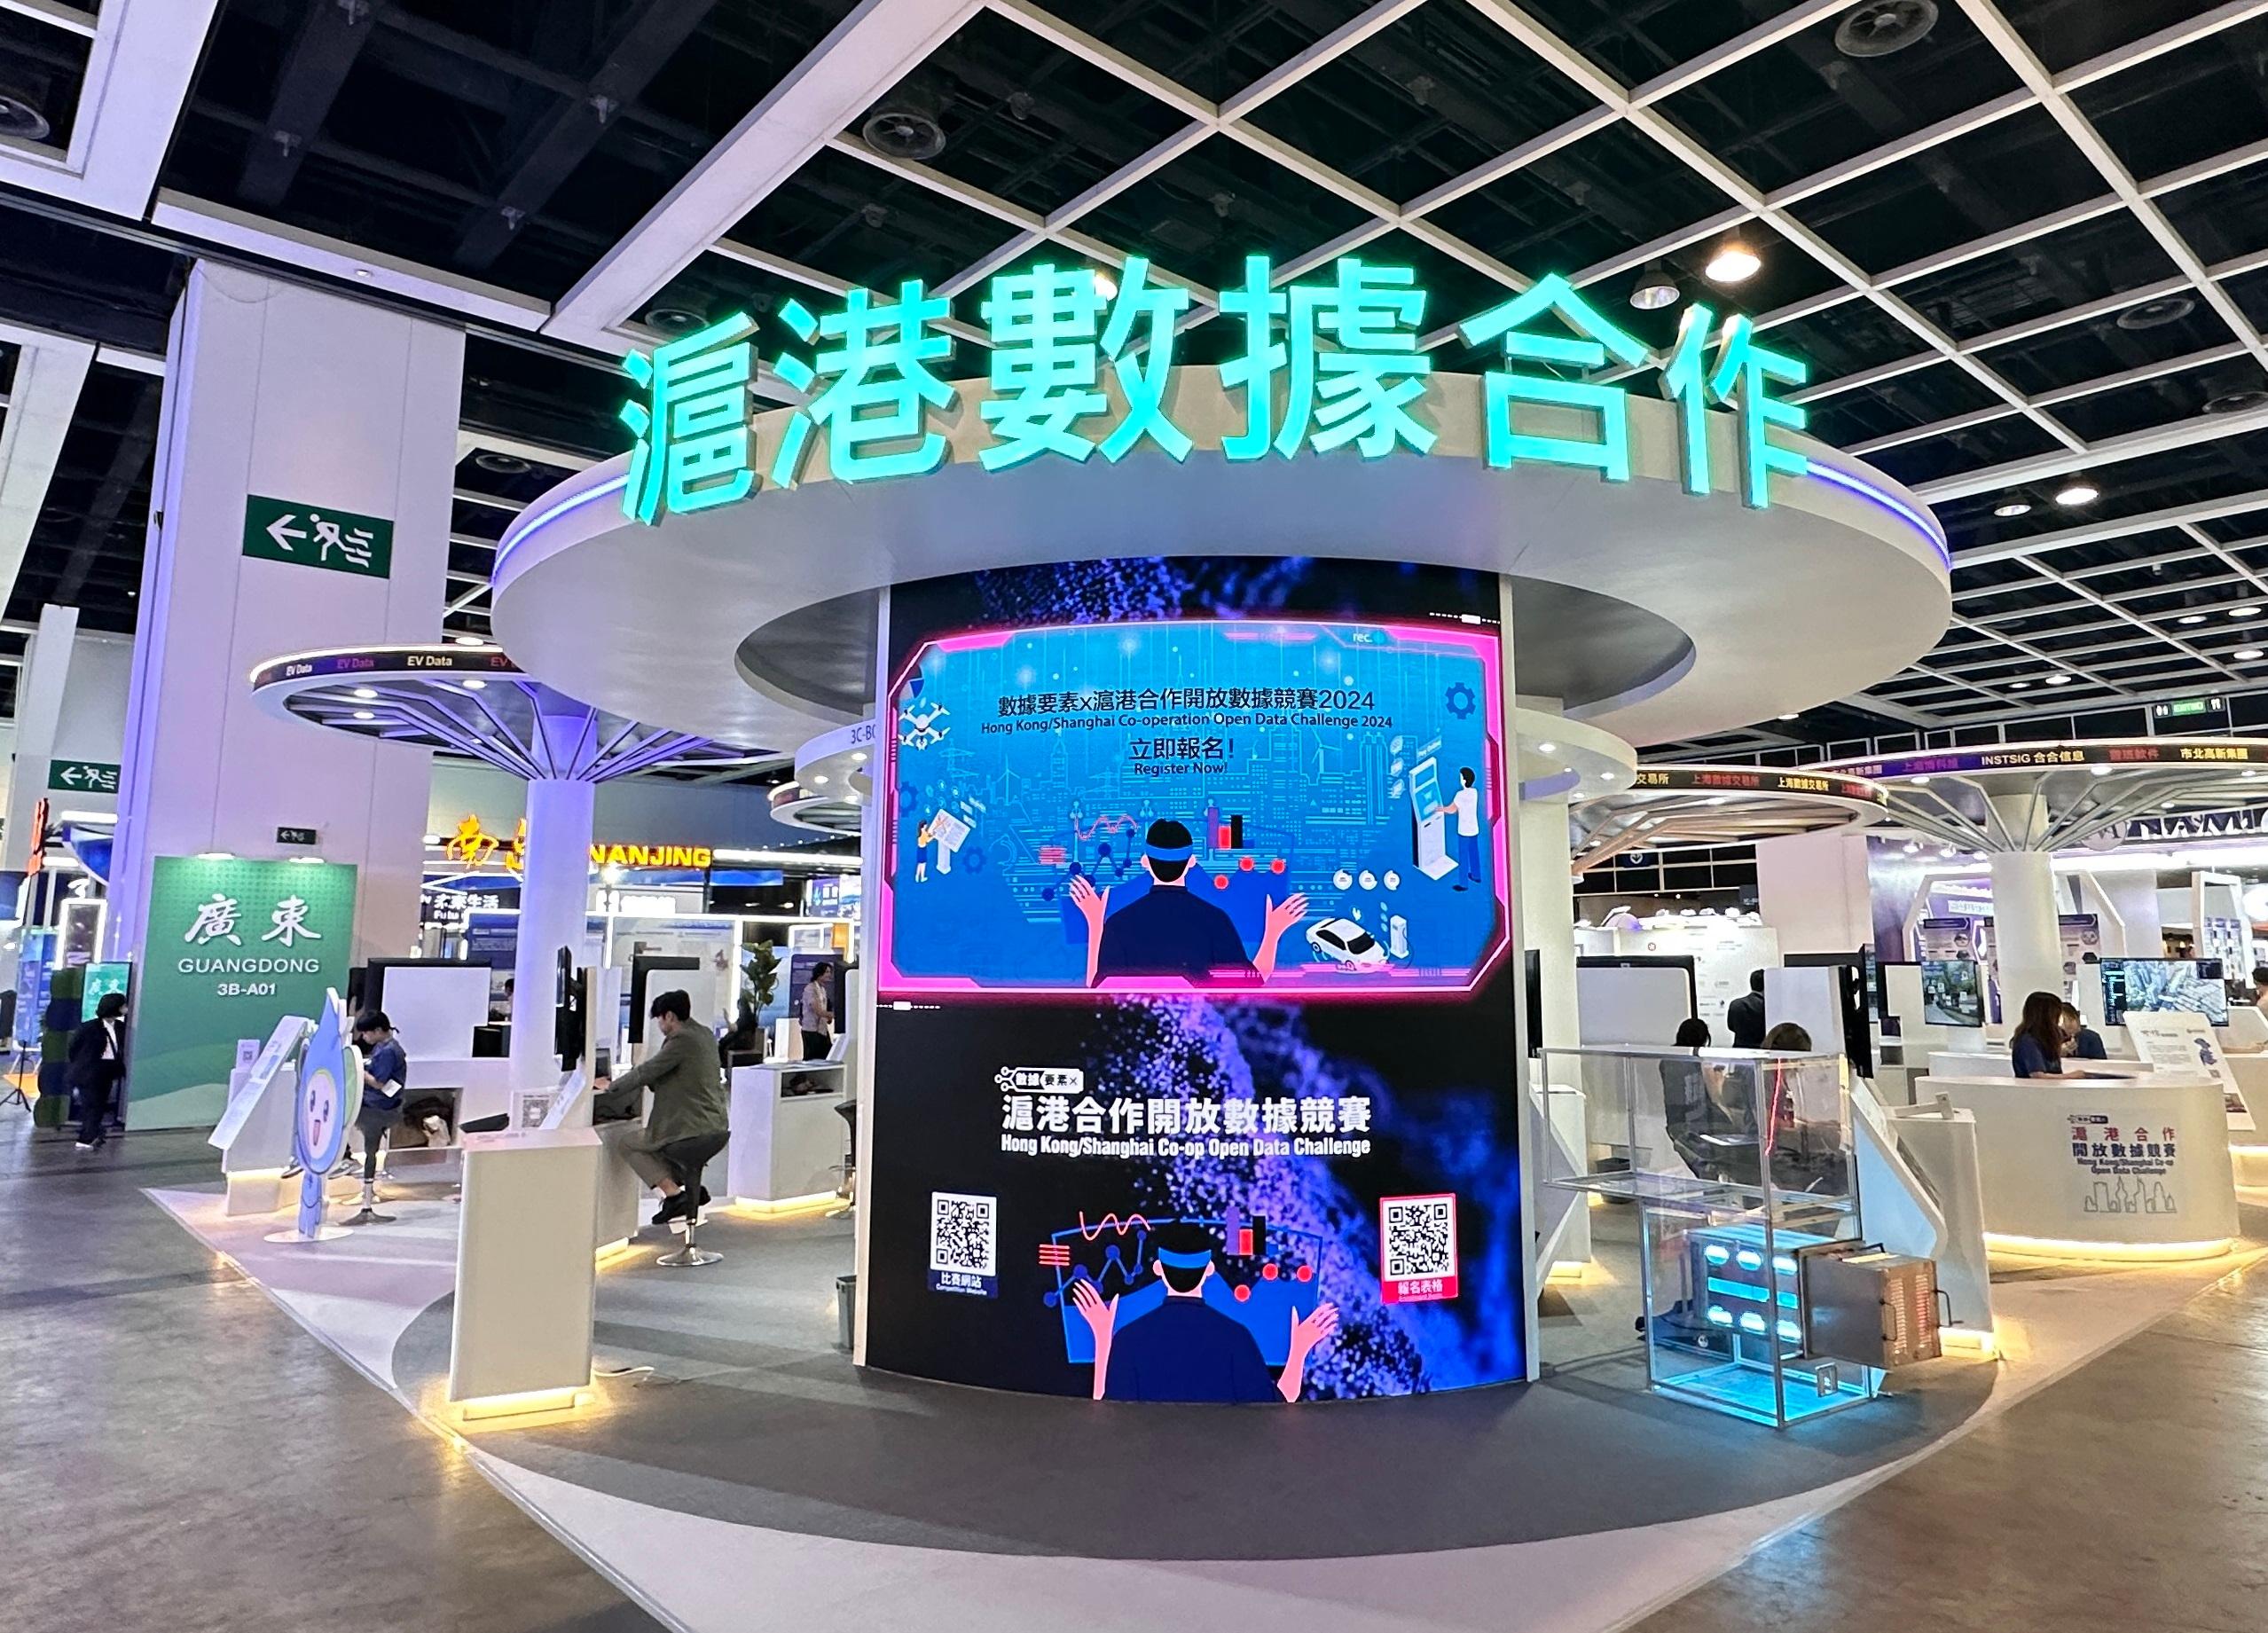 The Hong Kong/Shanghai Co-operation Open Data Challenge 2024 set up the Hong Kong/Shanghai Data Co-operation Pavilion at the InnoEx held from April 13 to 16 to showcase the open data application solutions of the two places.